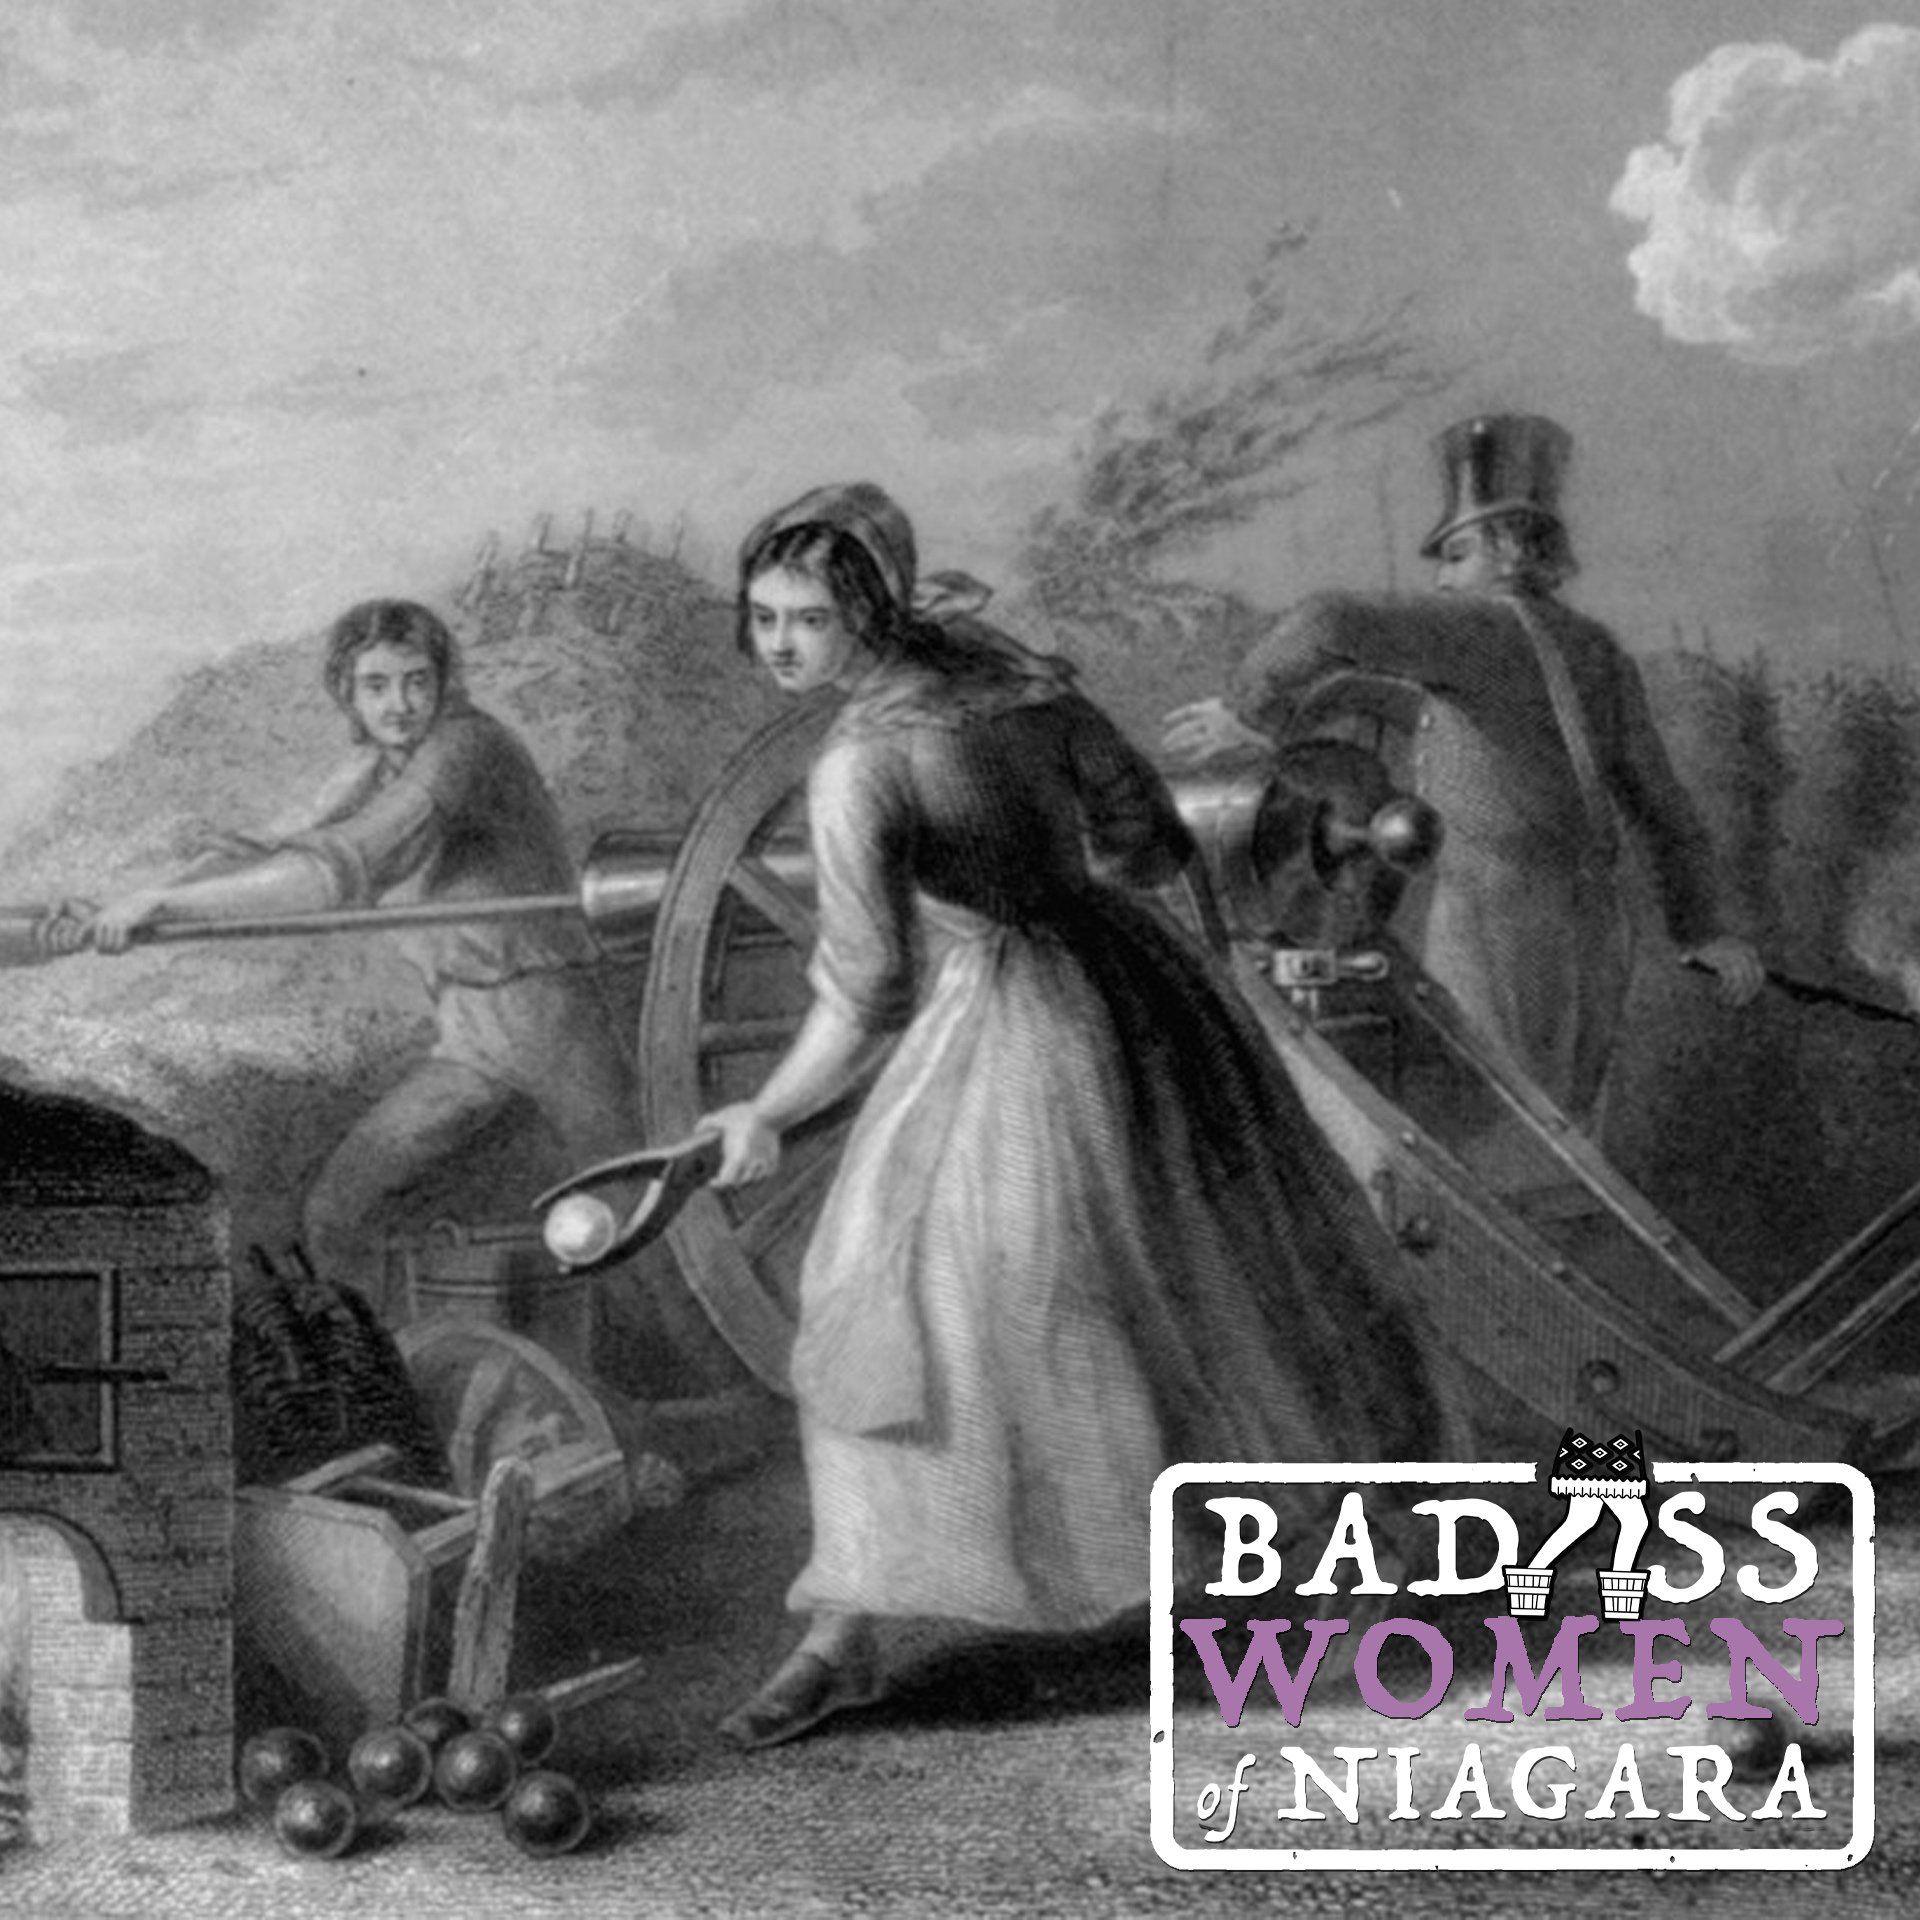 In the early dawn of November 21, 1812, Betsy Doyle looked out from Fort Niagara across the river to Fort George, waiting for the first shots to be fired. With ammunition for only 12 hours of bombardment, the American artillery was ordered to hold unless fired upon by the British.